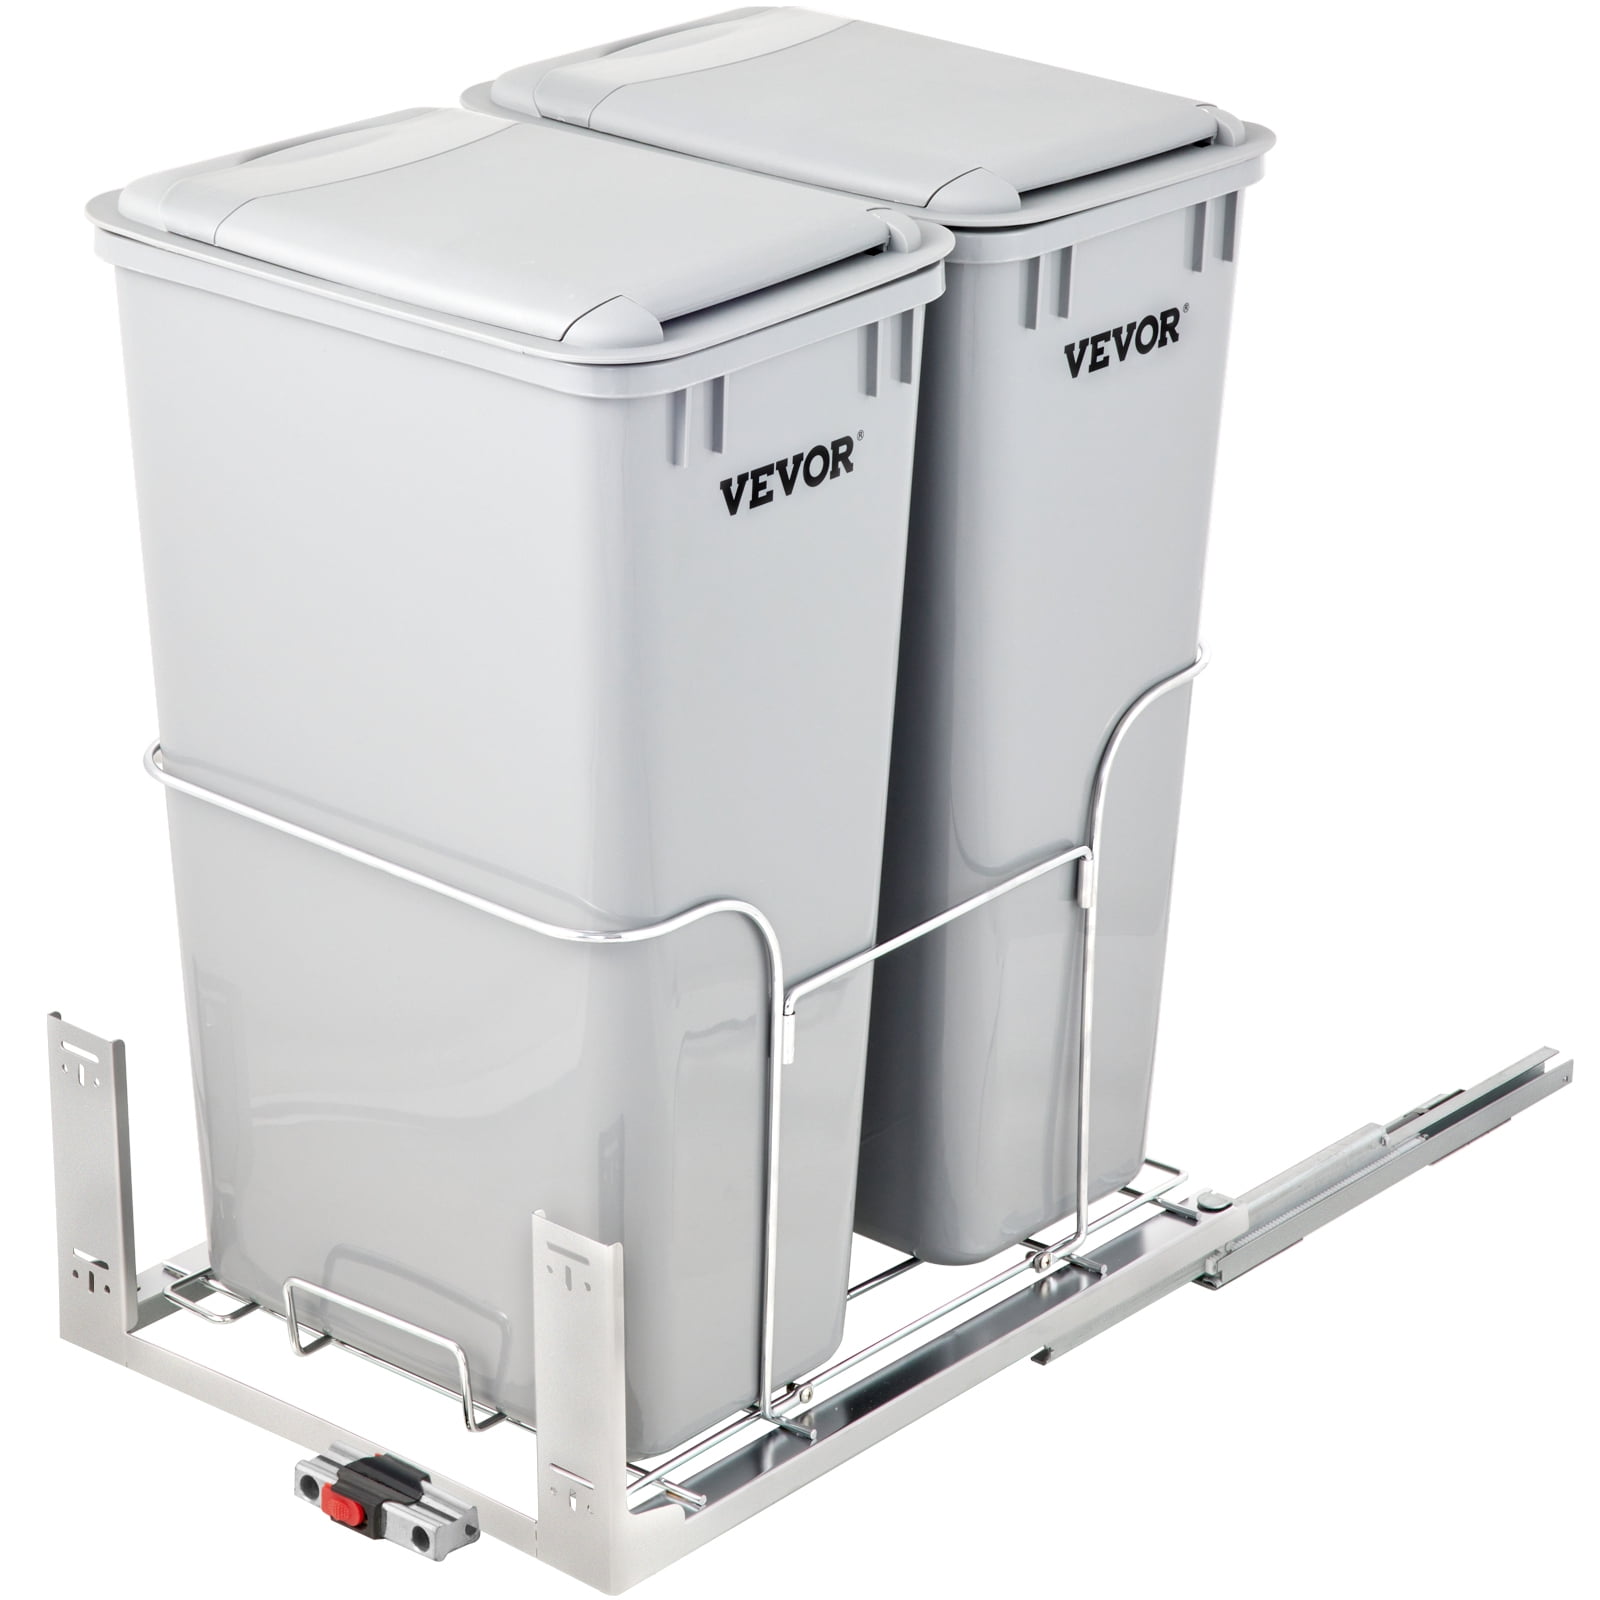 VEVOR Pull-Out Trash Can, 43Qt Double Bins, Under Mount Waste Container  with Soft-Close Slides, 176 lbs Load Capacity & Door-Mounted Brackets,  Garbage